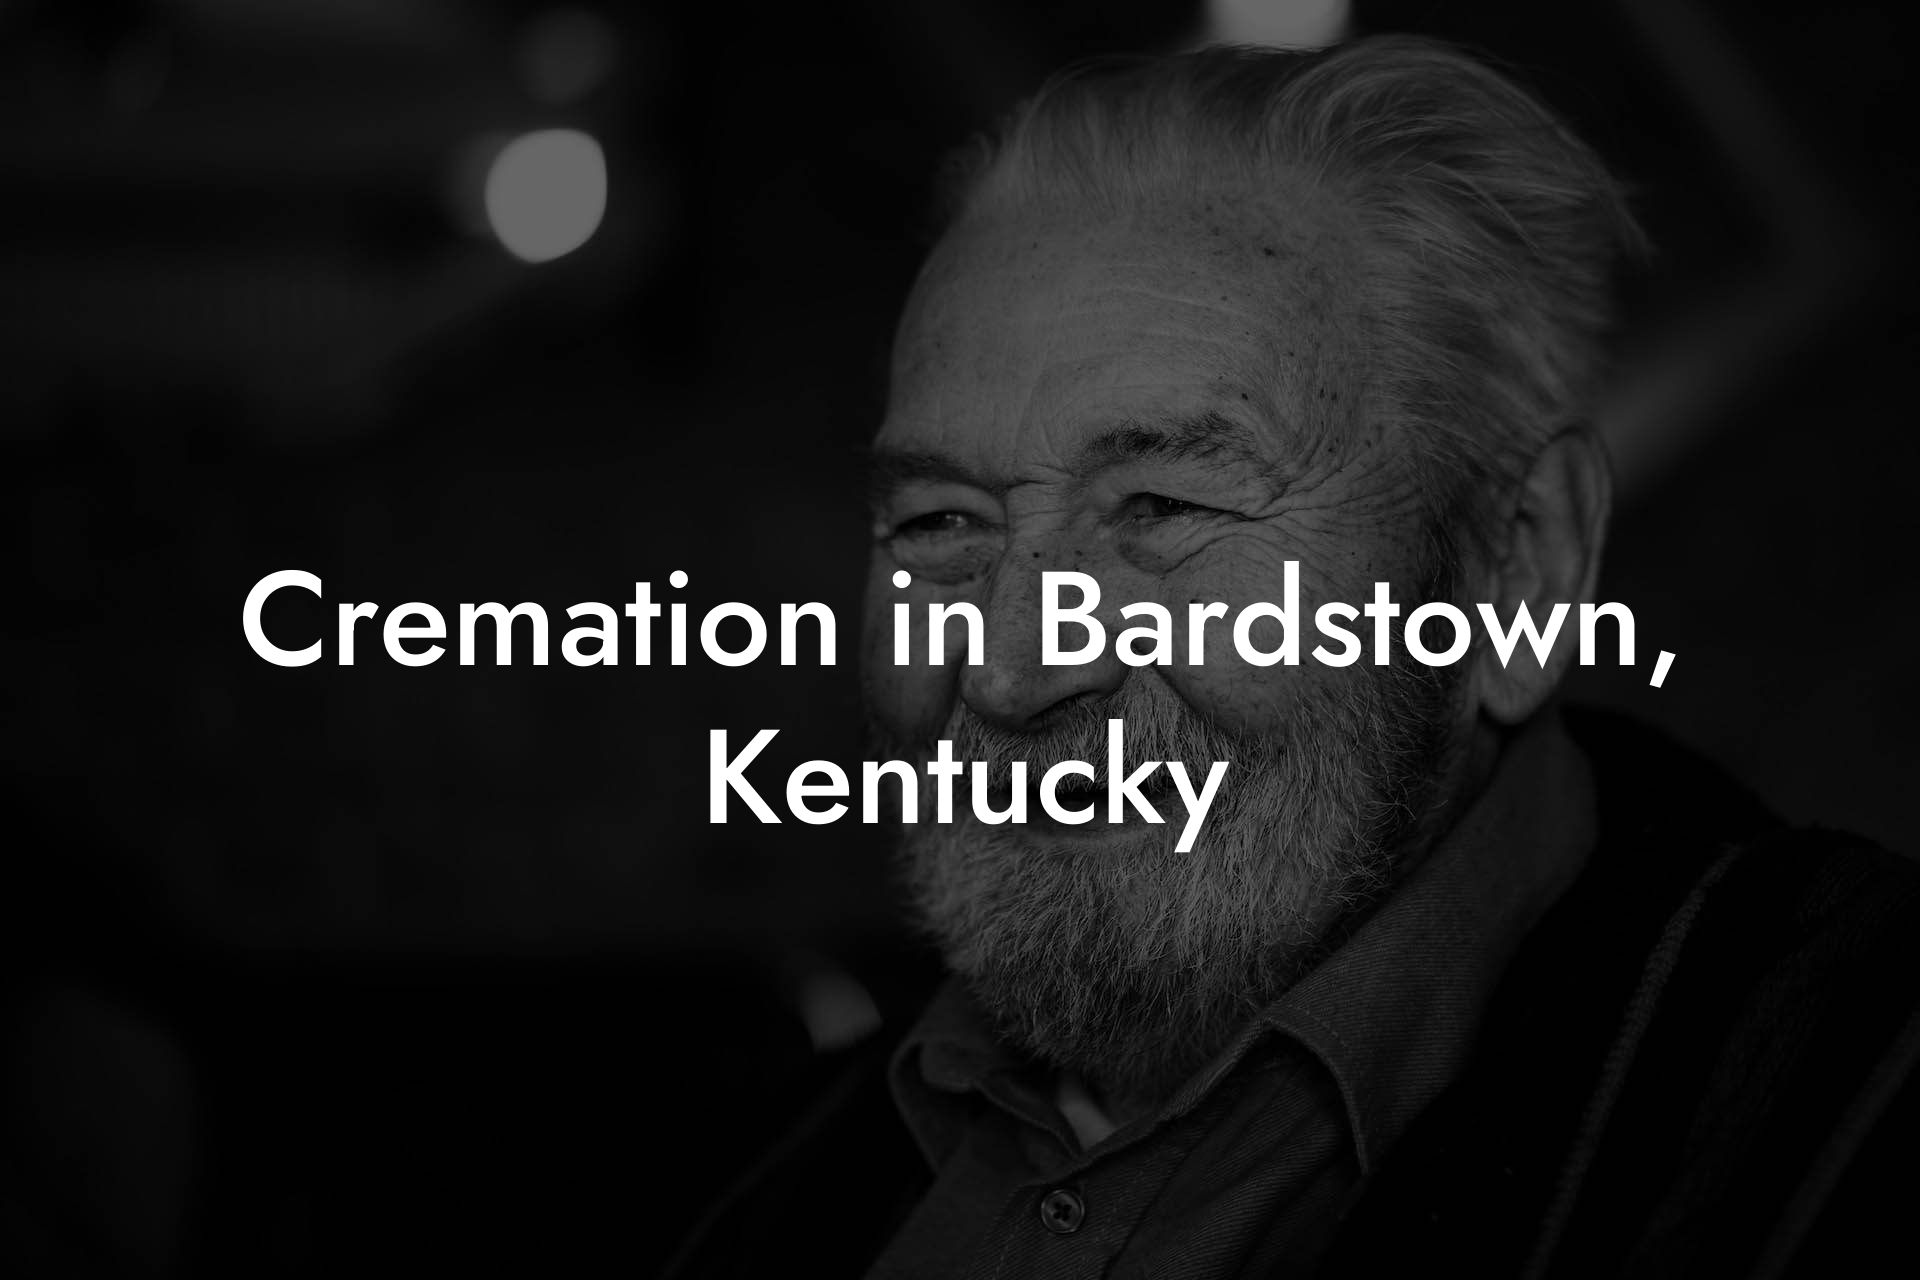 Cremation in Bardstown, Kentucky